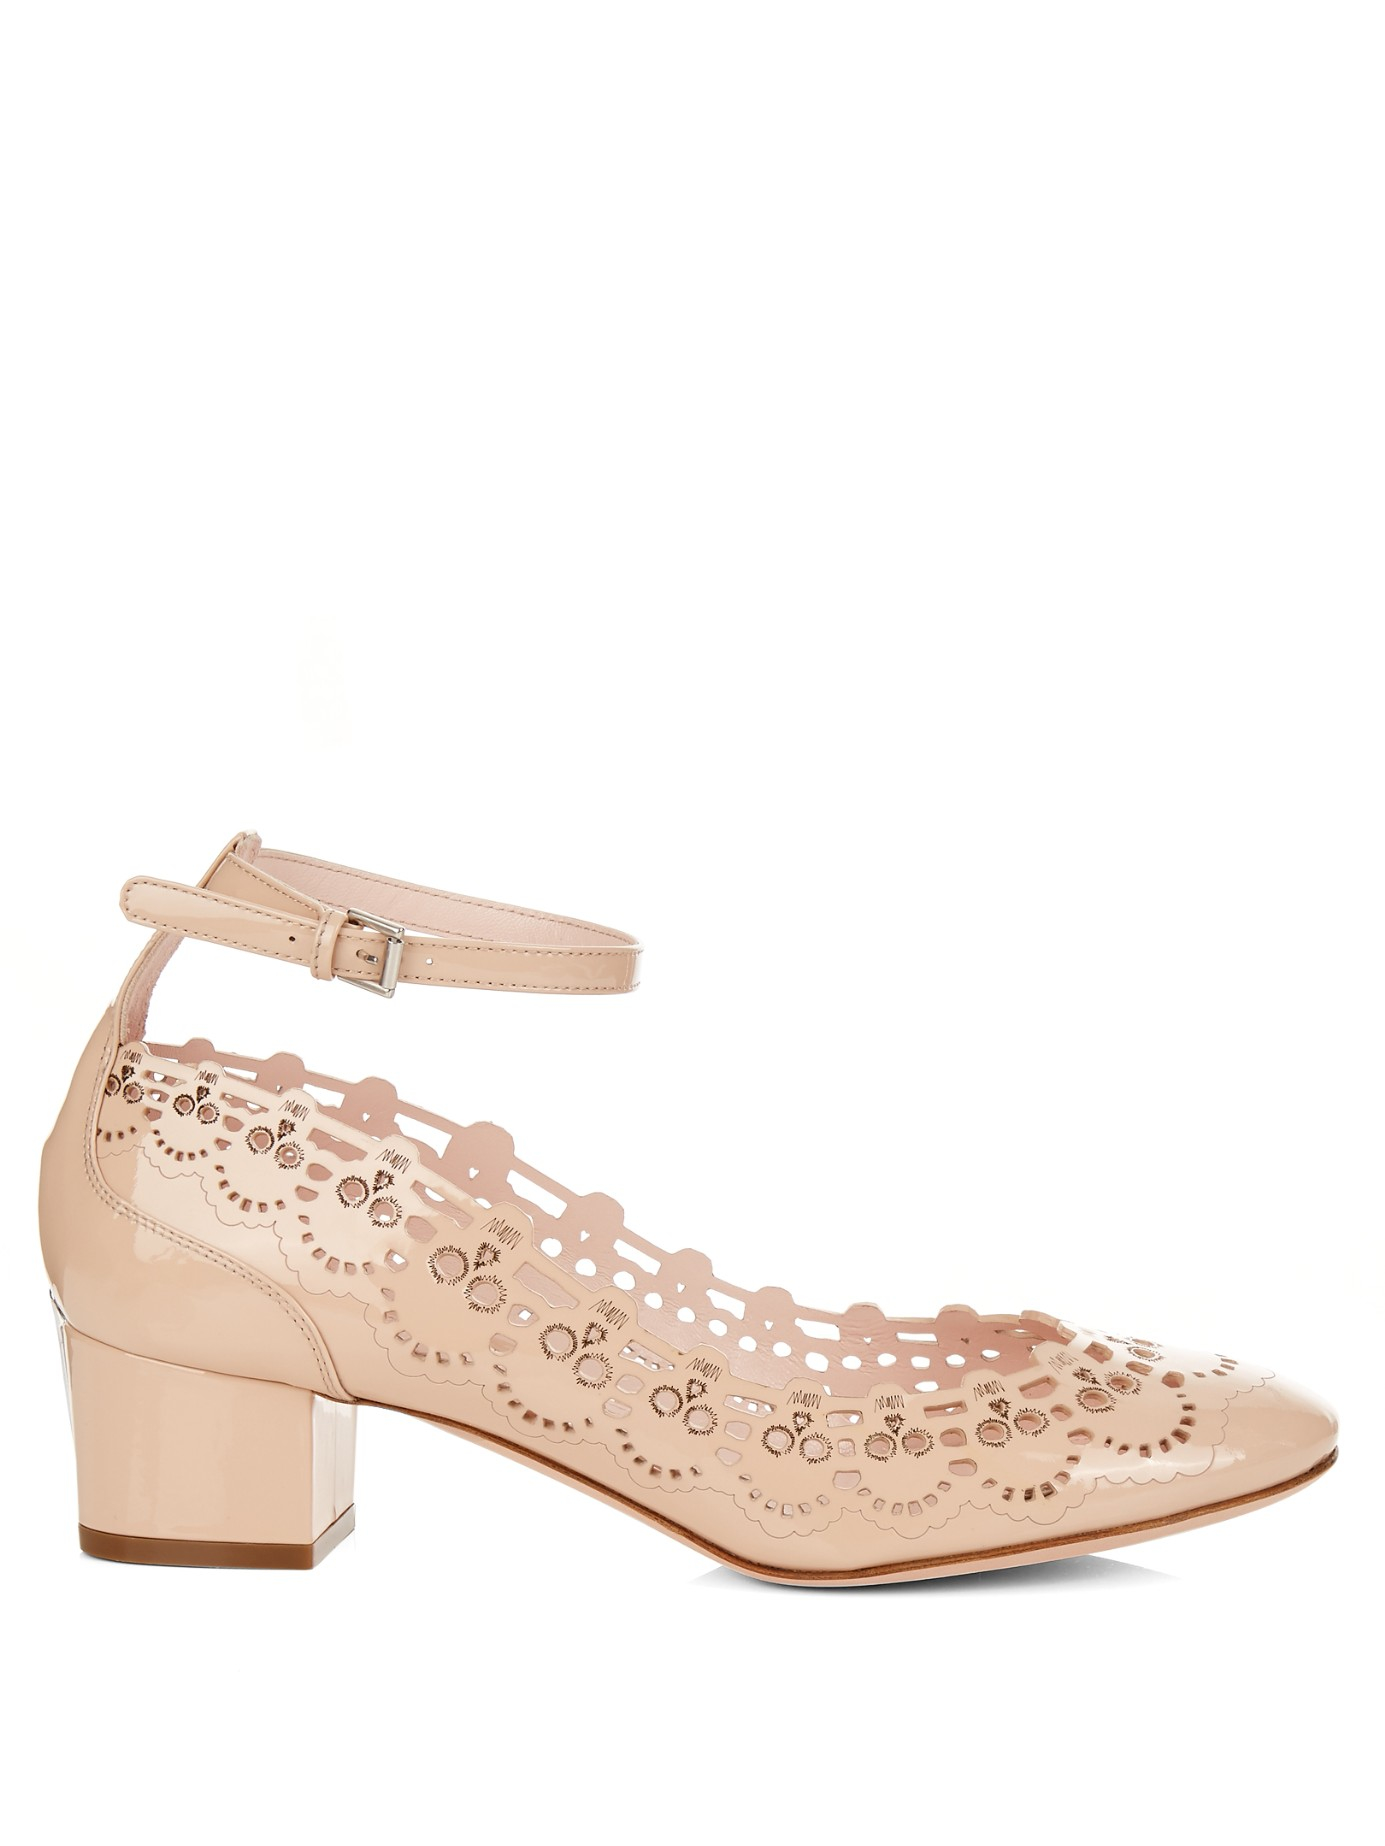 Alexander McQueen Mary-Jane Patent-Leather Skull Pumps in Natural | Lyst